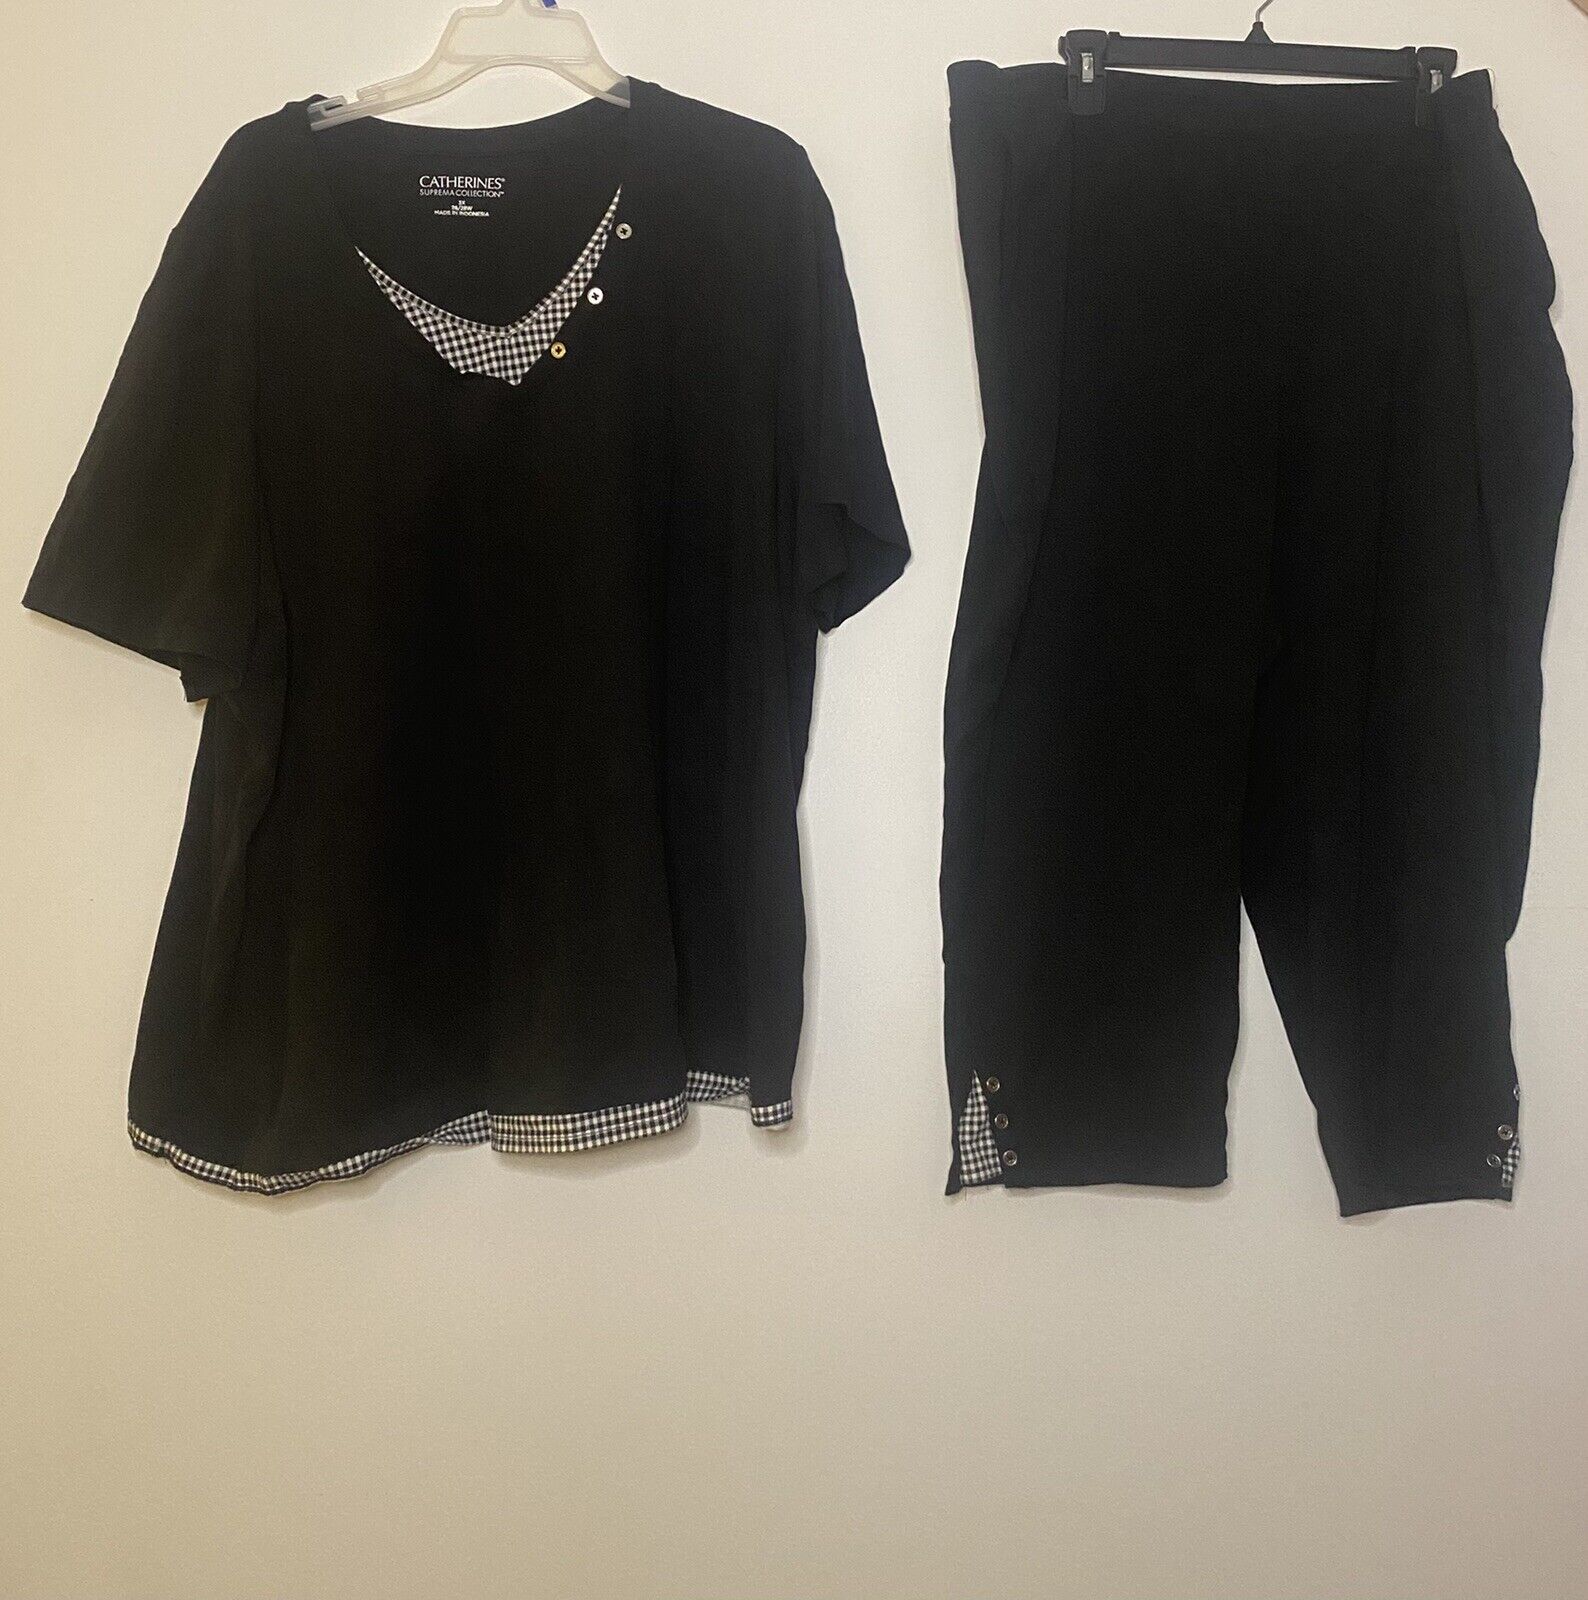 Catherines Suprema Collection Black Shirt And Leggings Set Size 2x ( 22/24w )